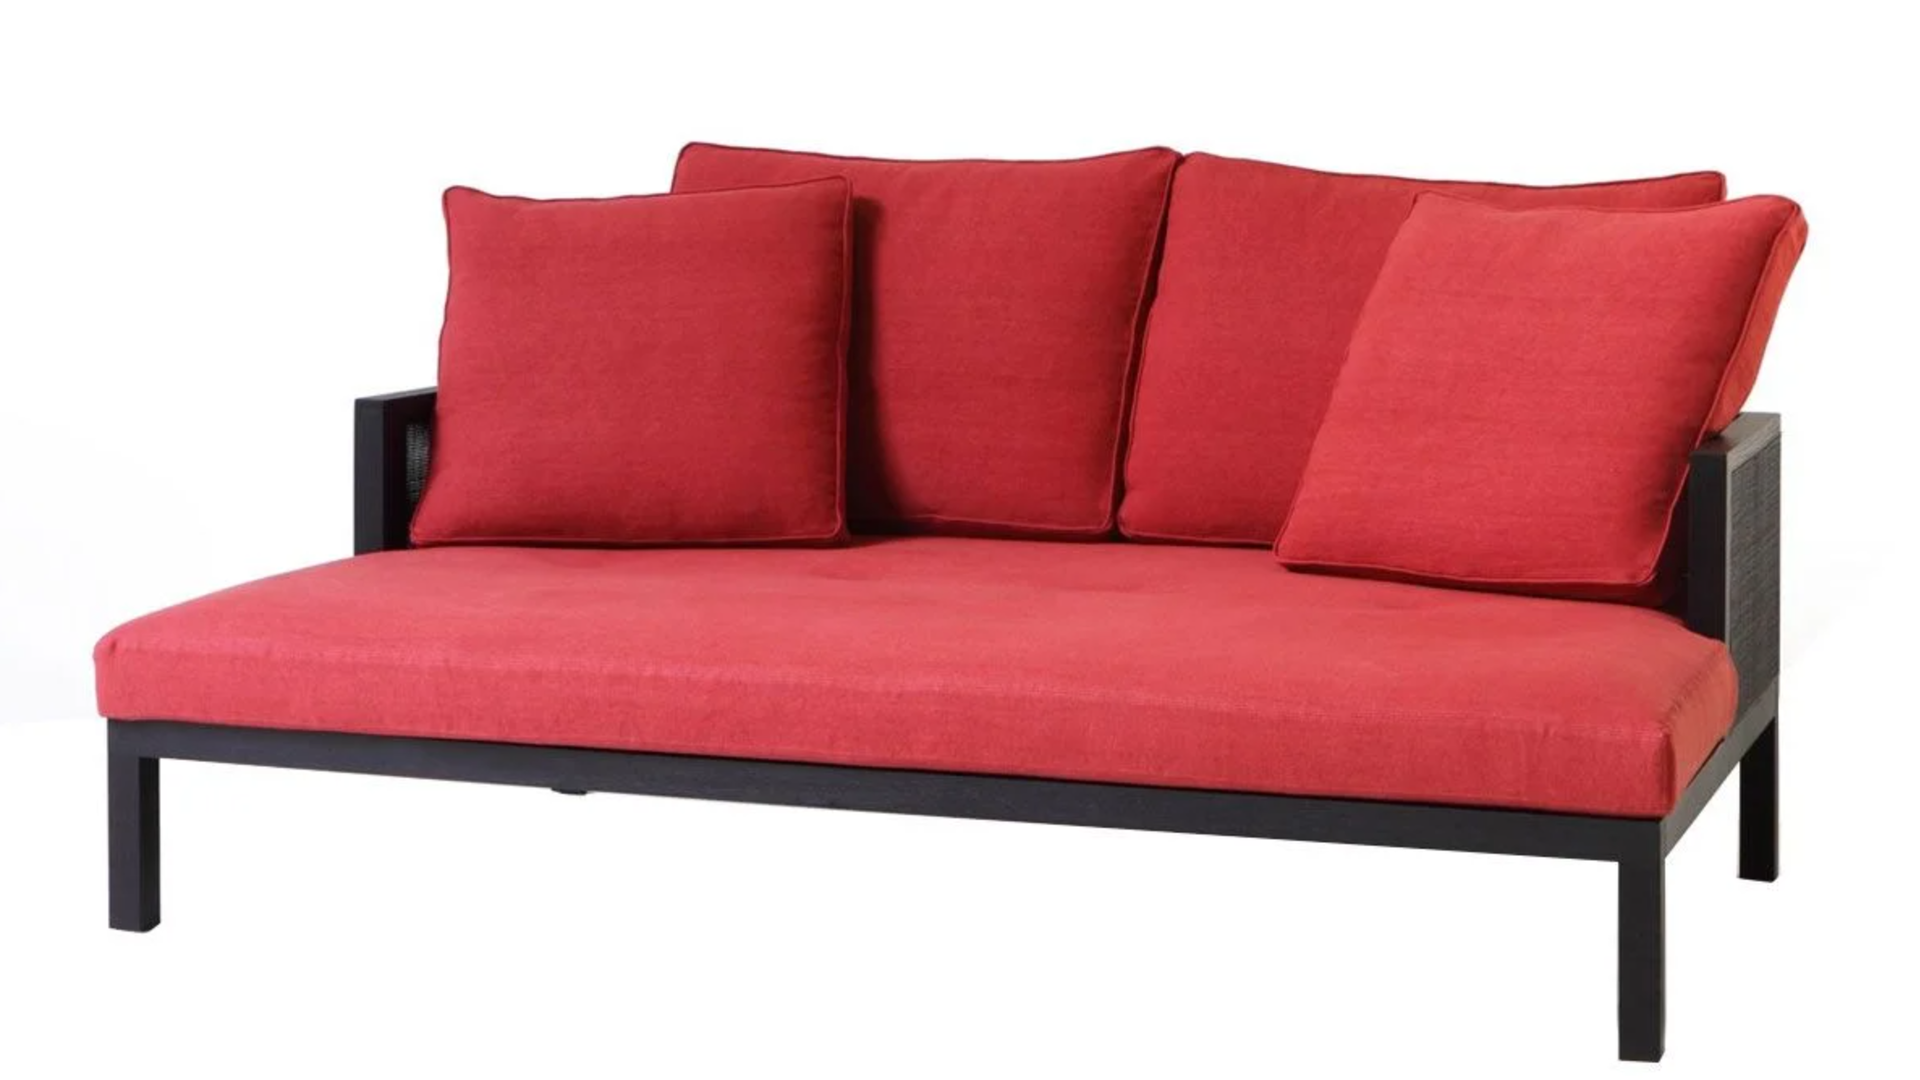 Porro Curry daybed sofa HORA Barneveld 1.png